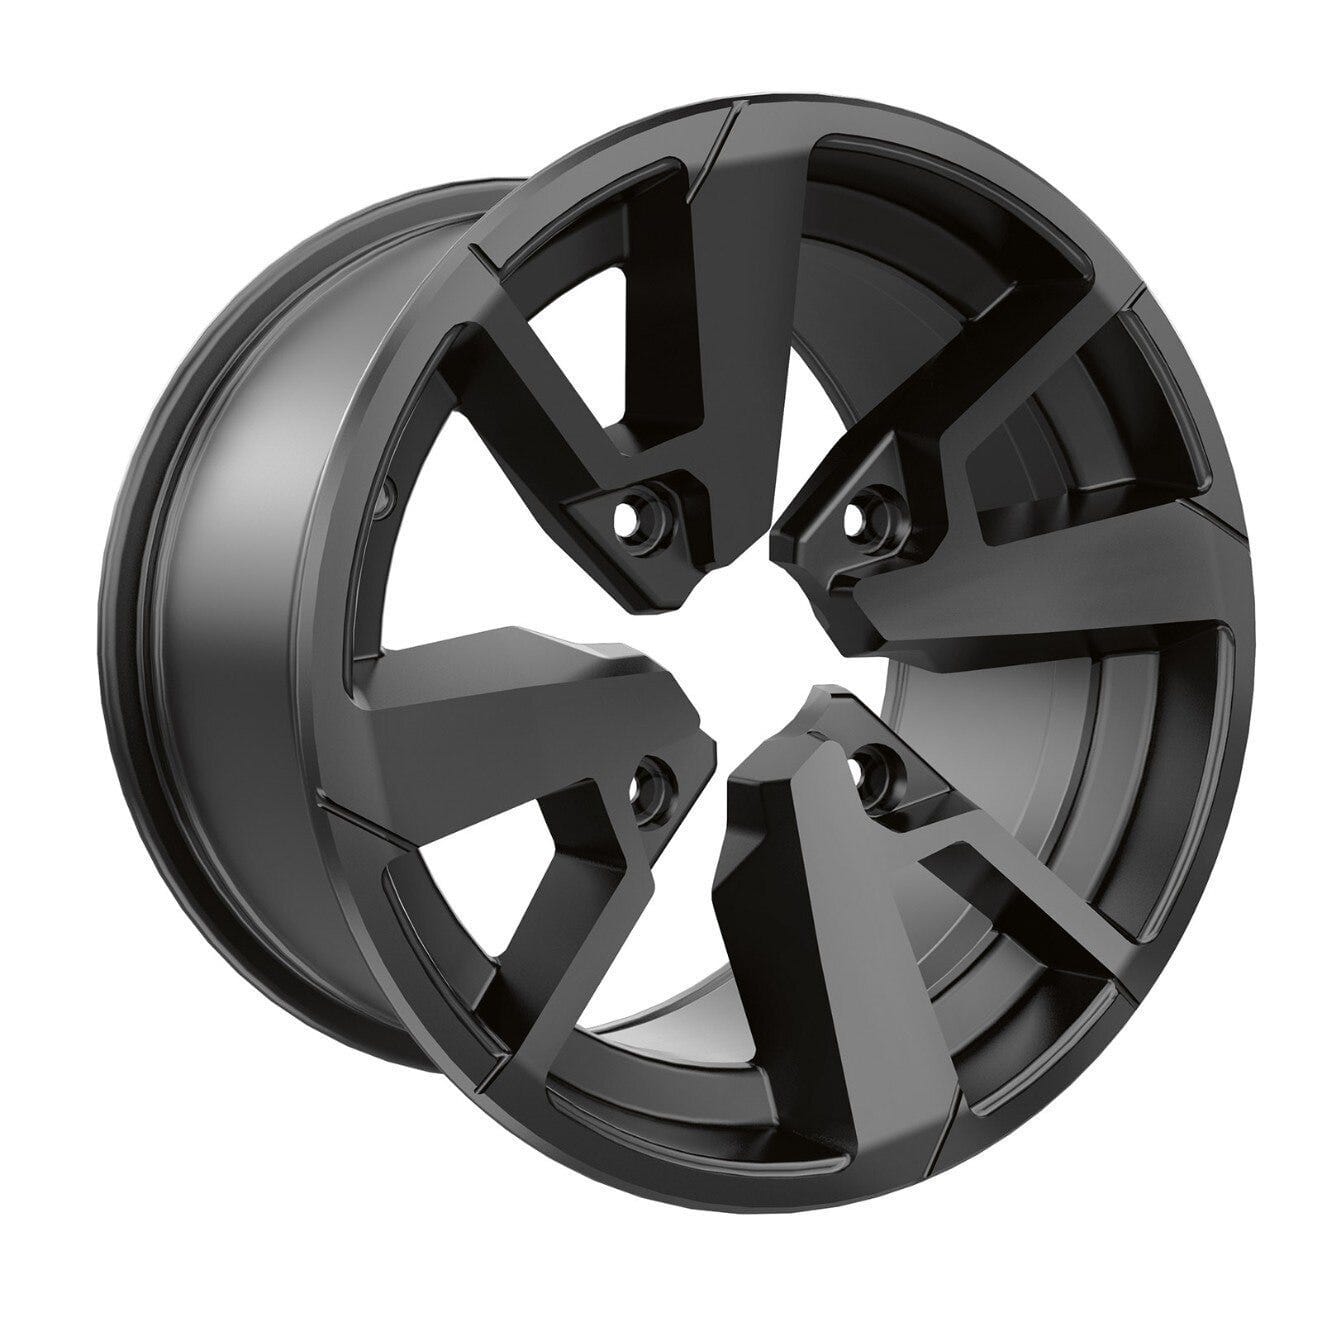 14 in. Rim - Rear / Black with clear coat - Propowersports.ca